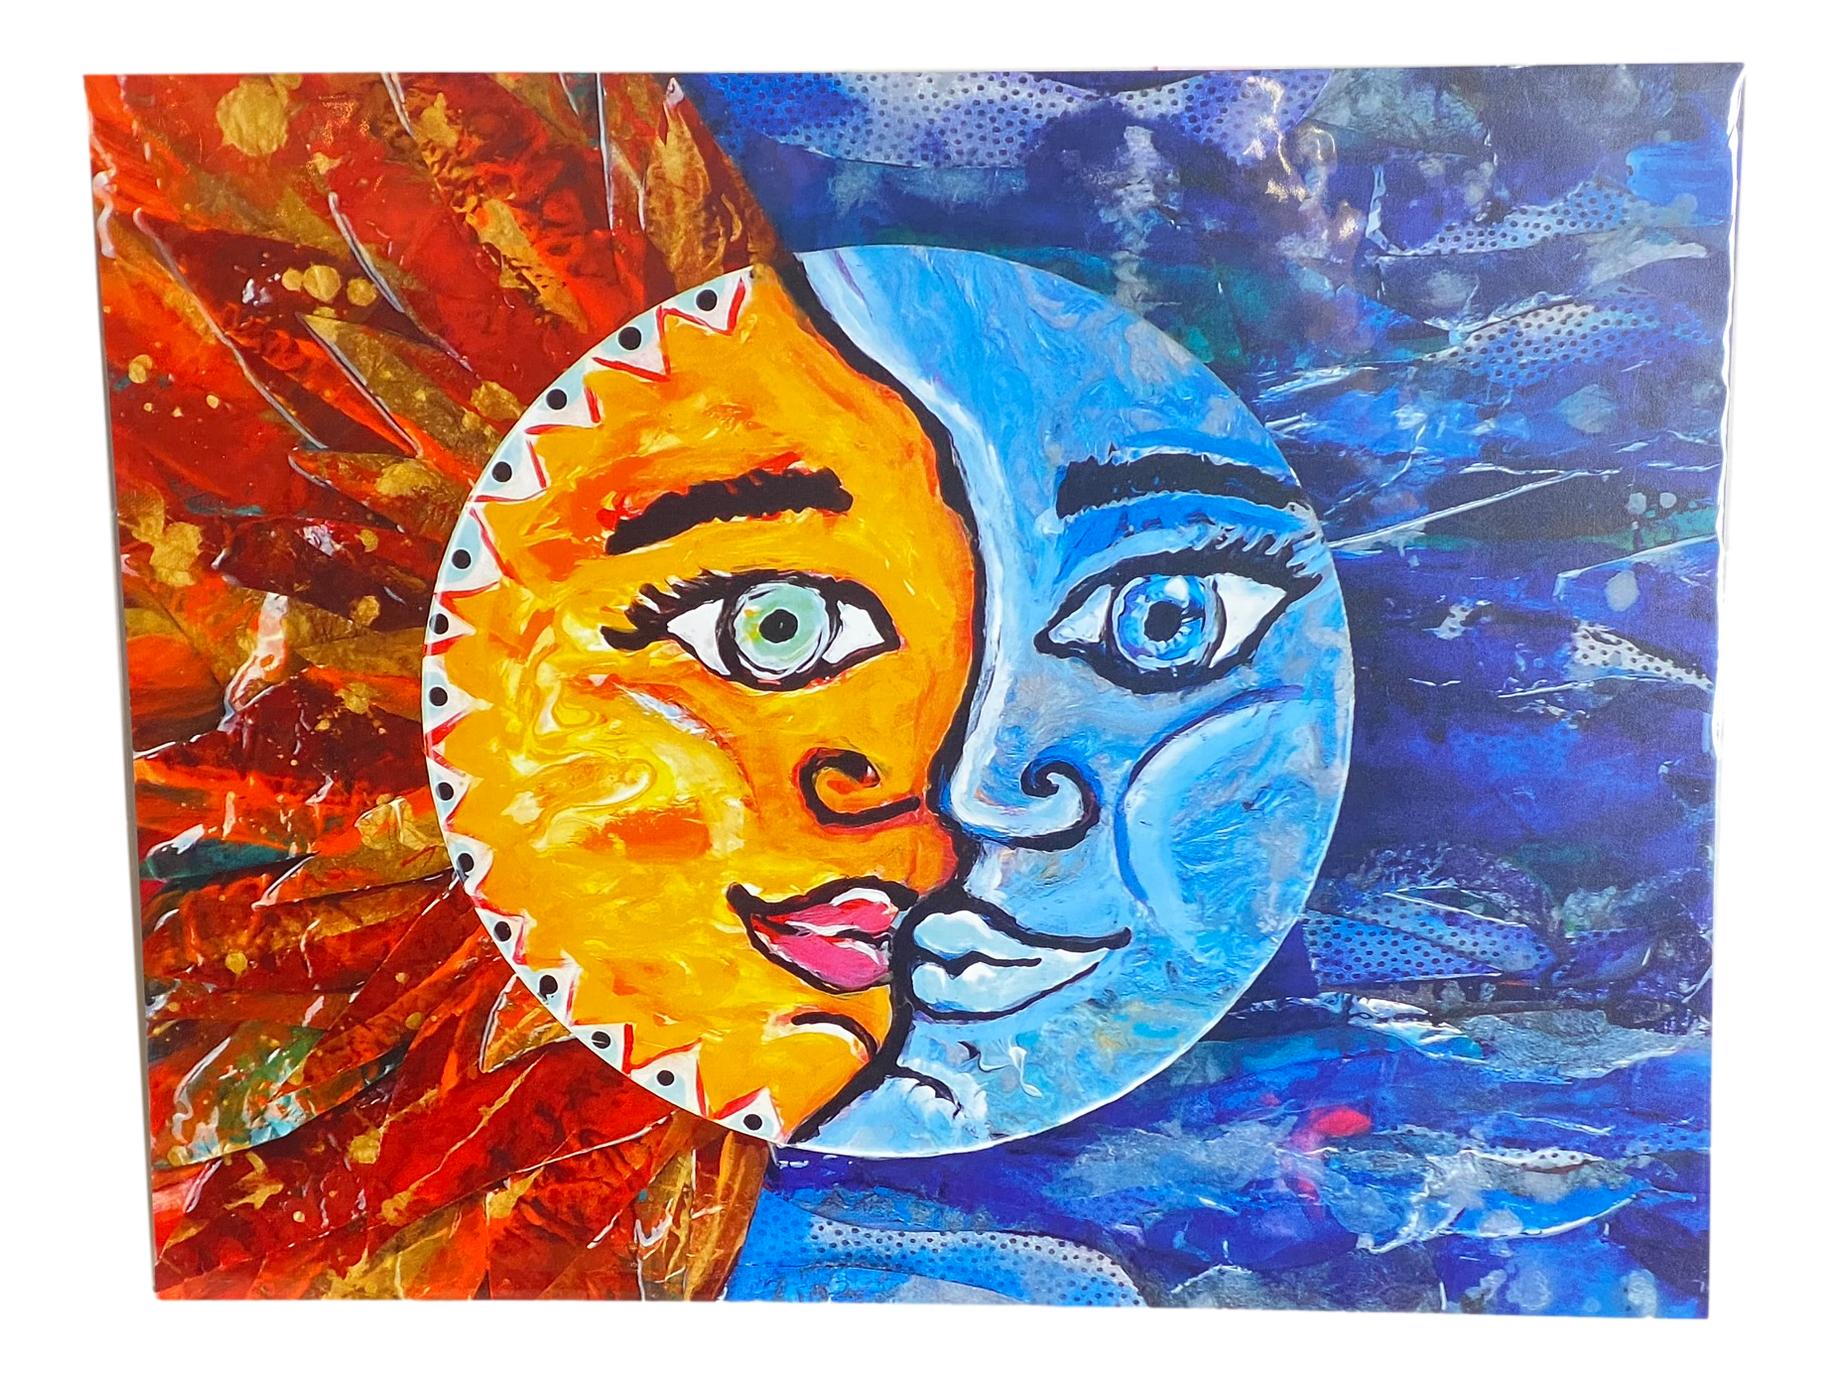 Poster Sun and Moon Print Handcrafted by Local Artist Vanessa 14 L x 11 W Inches - Ysleta Mission Gift Shop- VOTED 2022 El Paso's Best Gift Shop